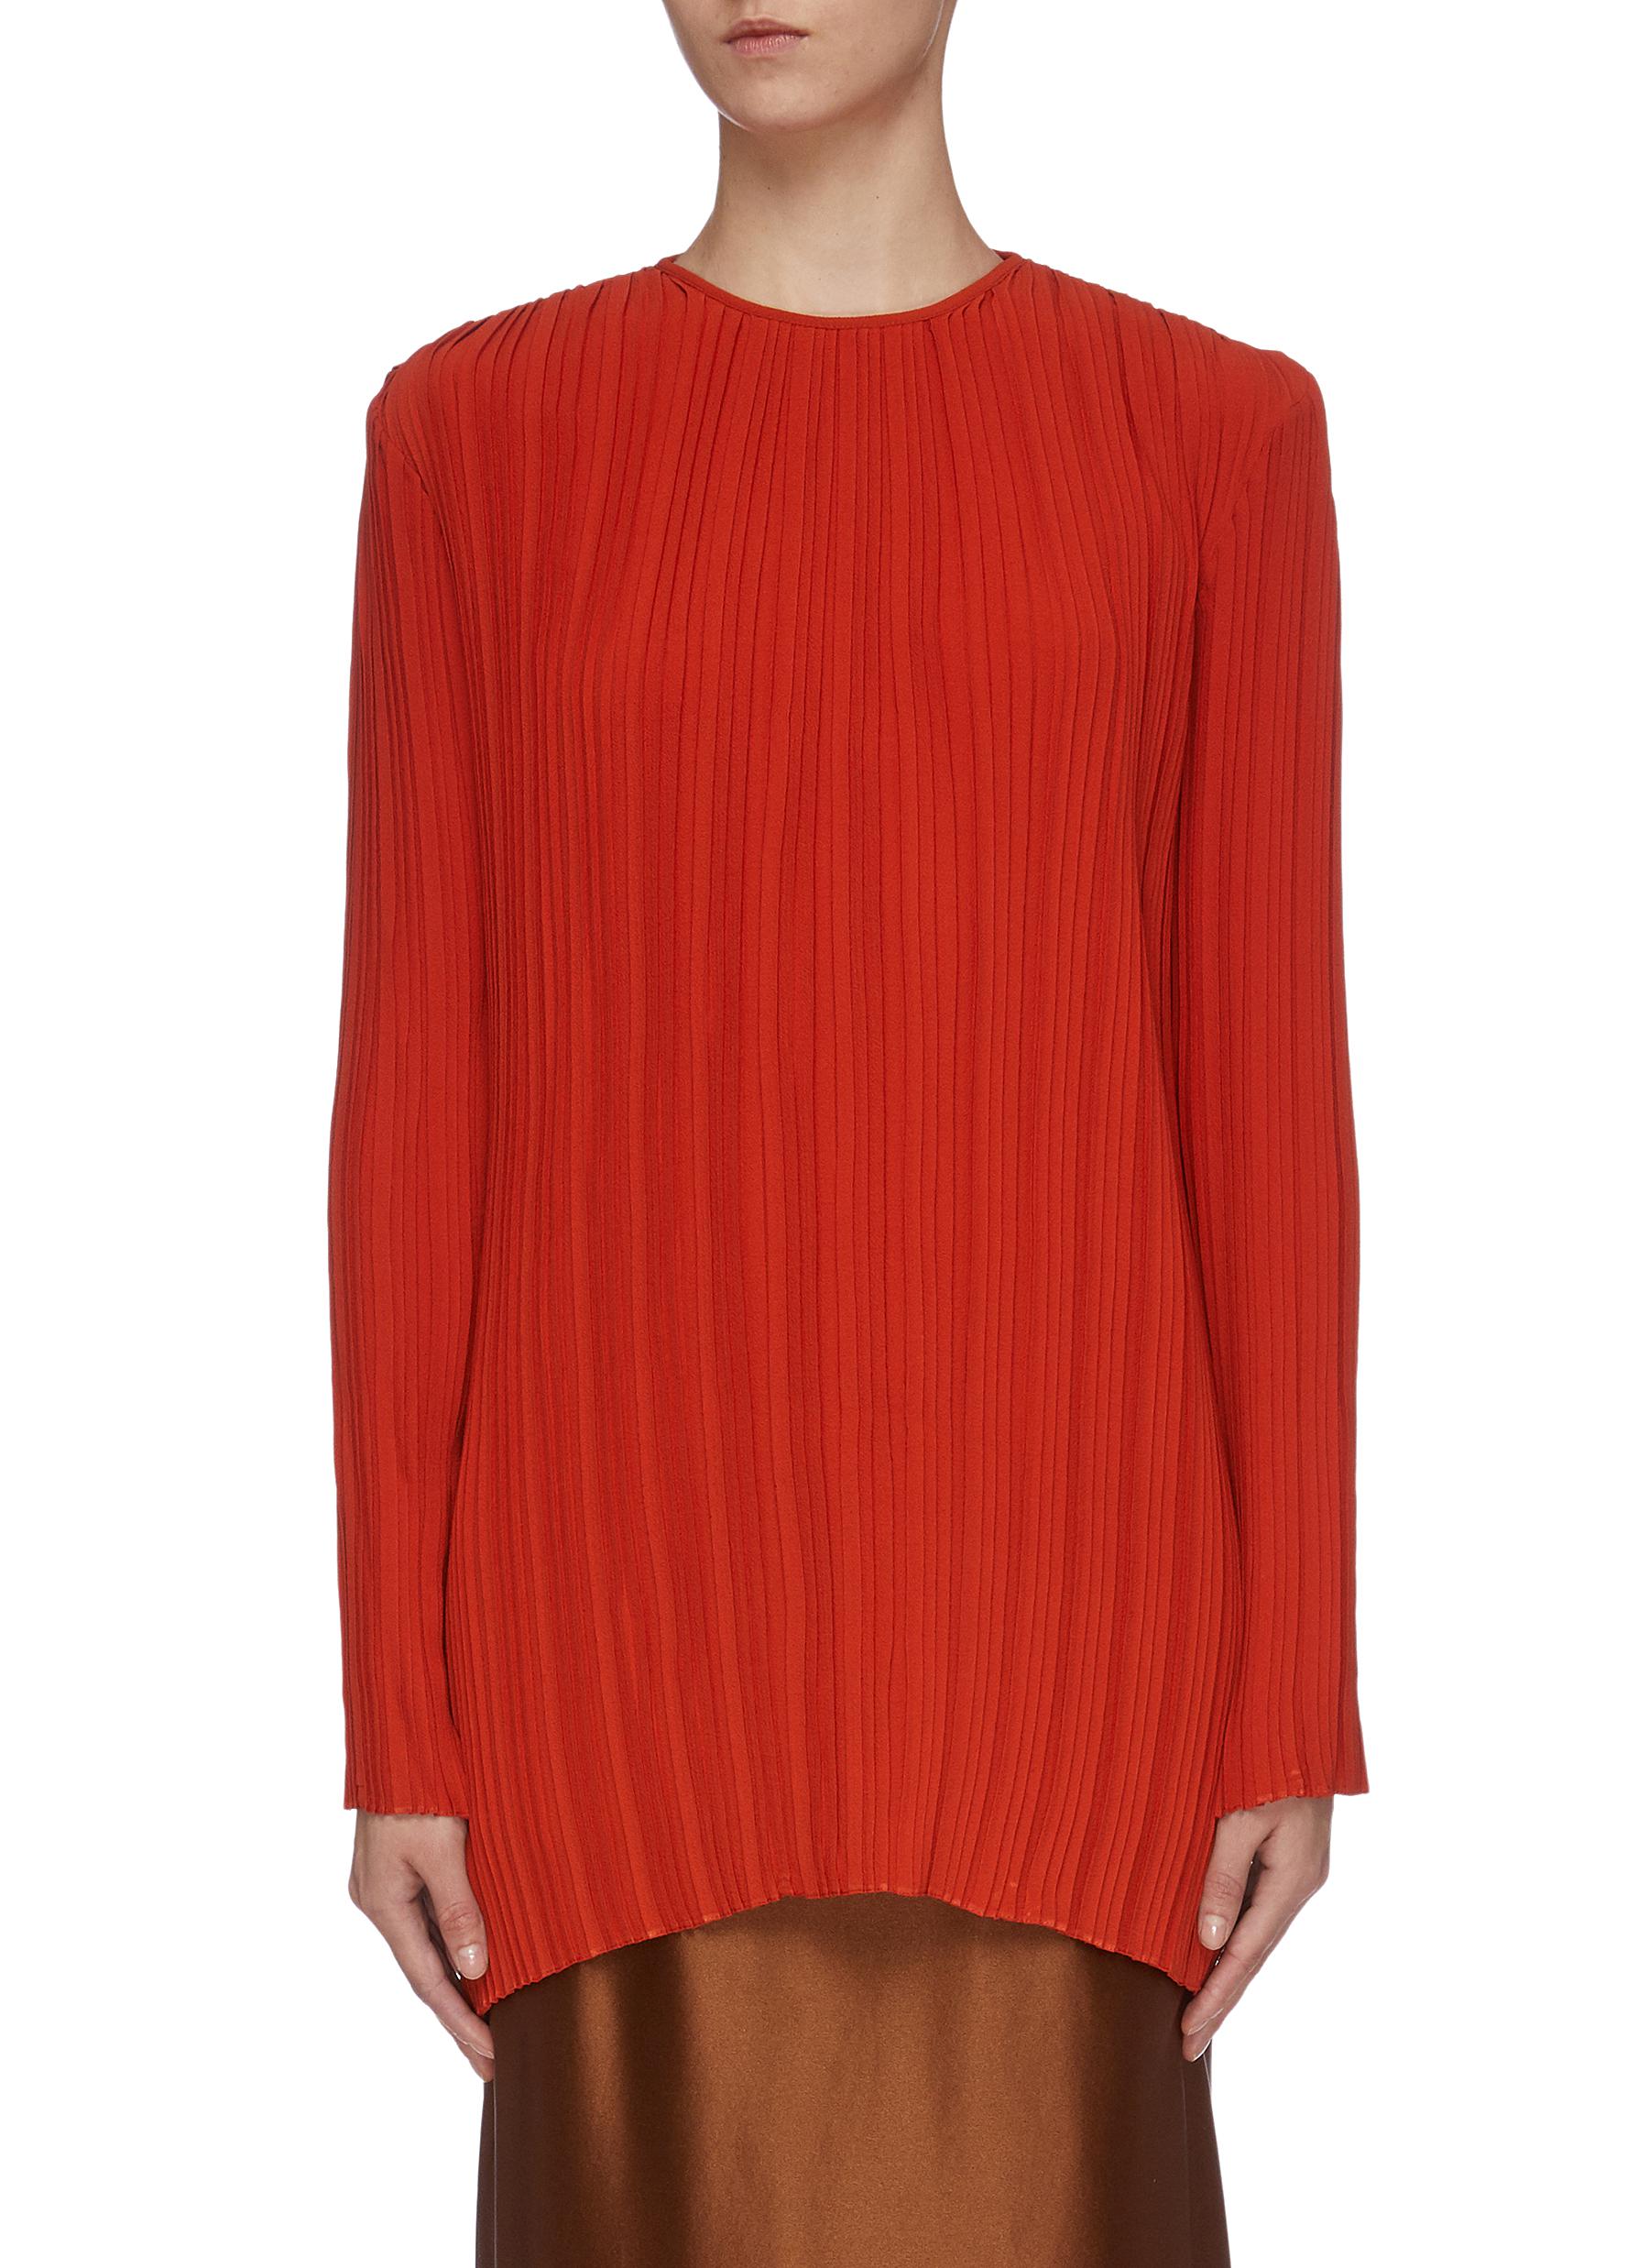 Panelled pleated crepe tunic top by Victoria, Victoria Beckham